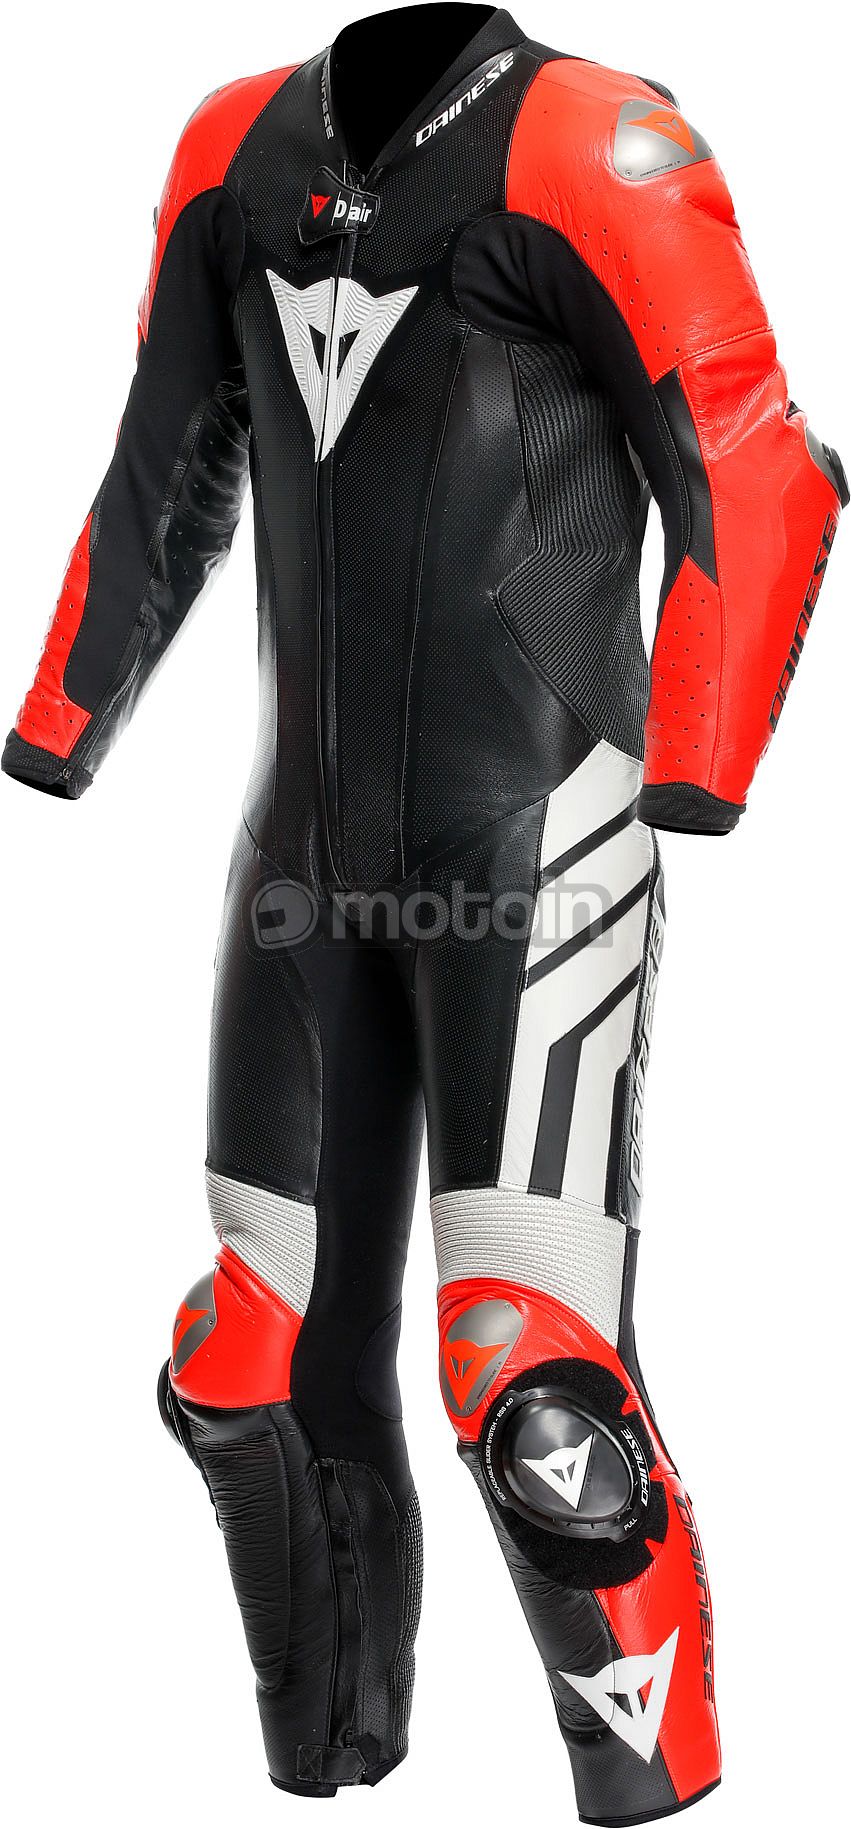 Dainese Mugello 3 D-air, leather suit 1pcs. perforated